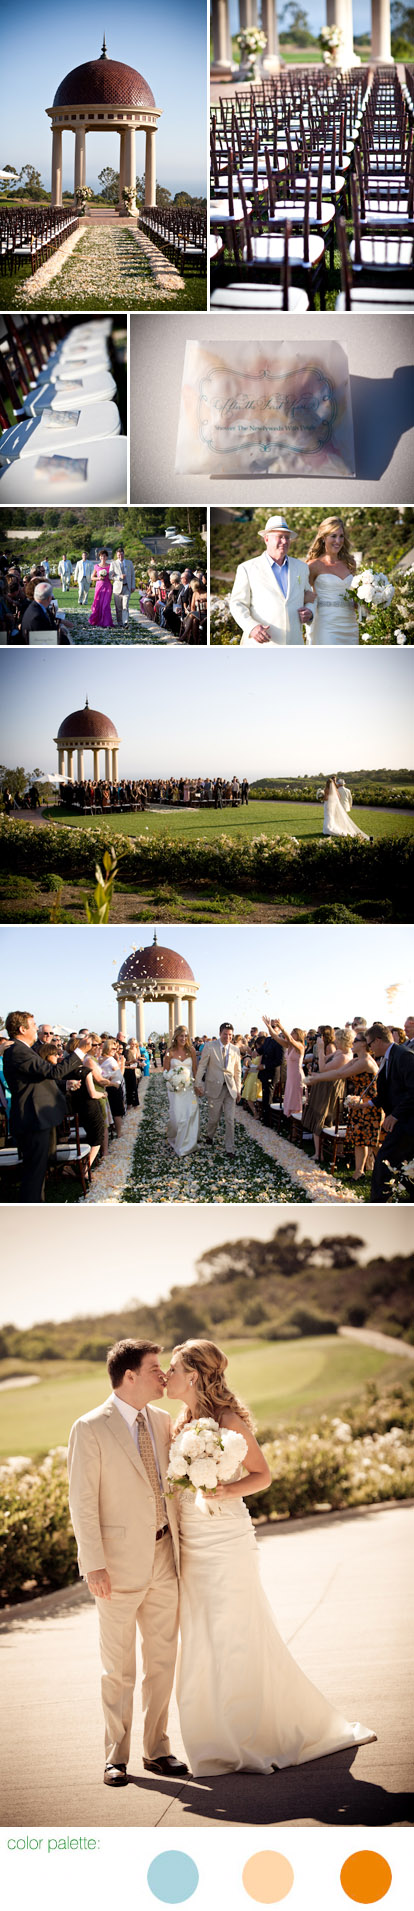 Vintage style wedding ceremony by Mindy Weiss at The Resort at Pelican Hill, teal, peach and rose gold wedding color palette, images by Jay Lawrence Goldman